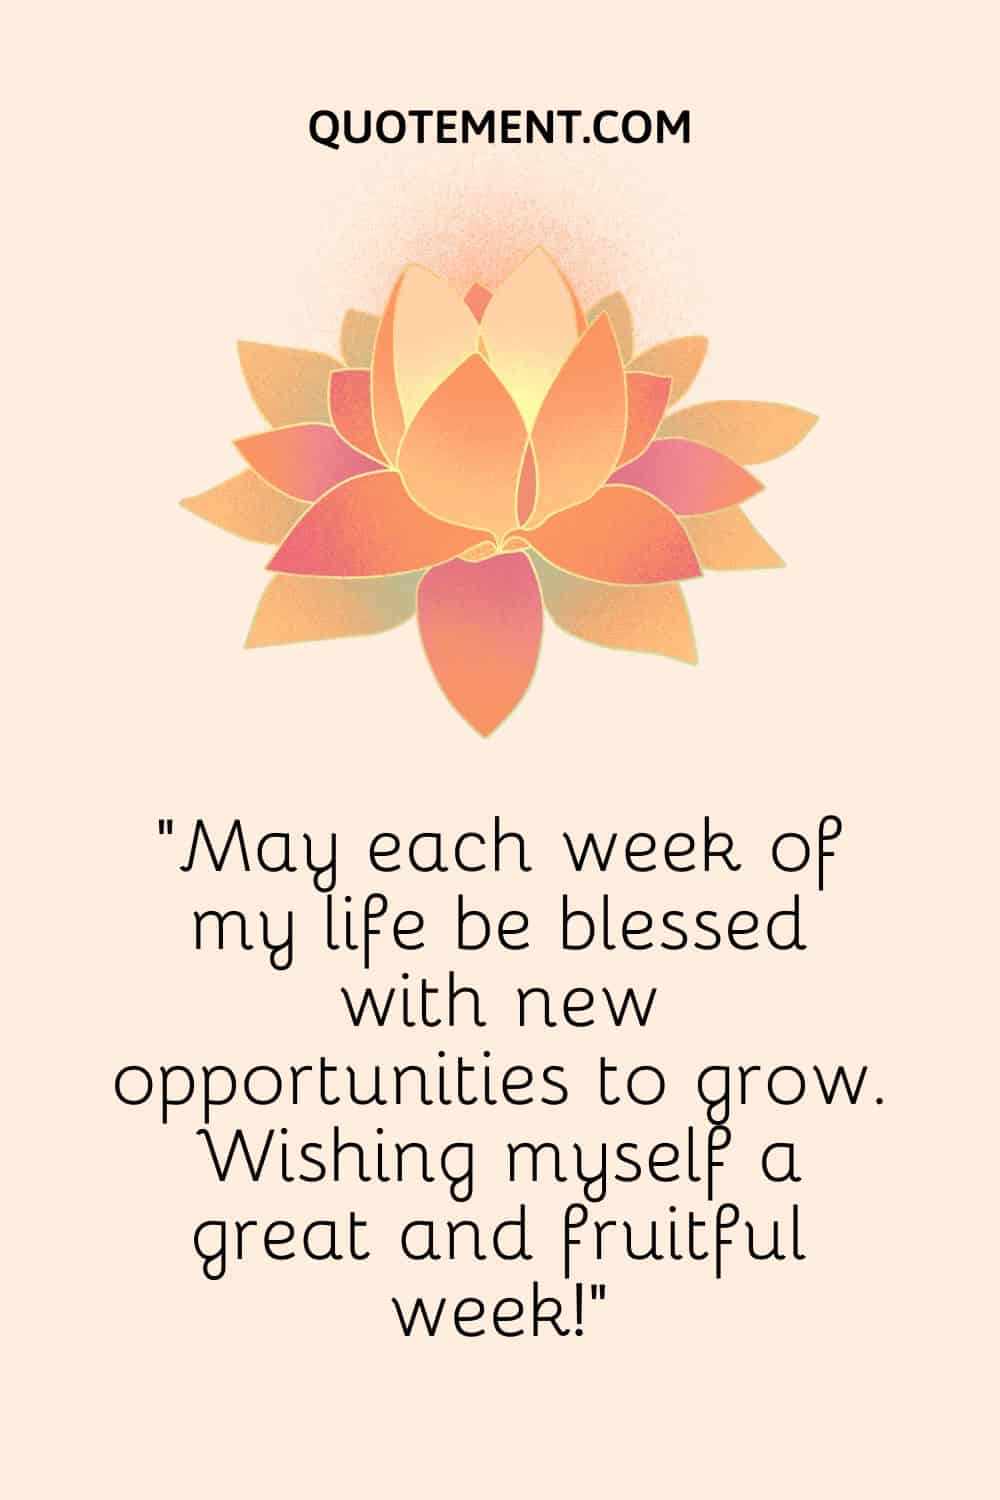 May each week of my life be blessed with new opportunities to grow